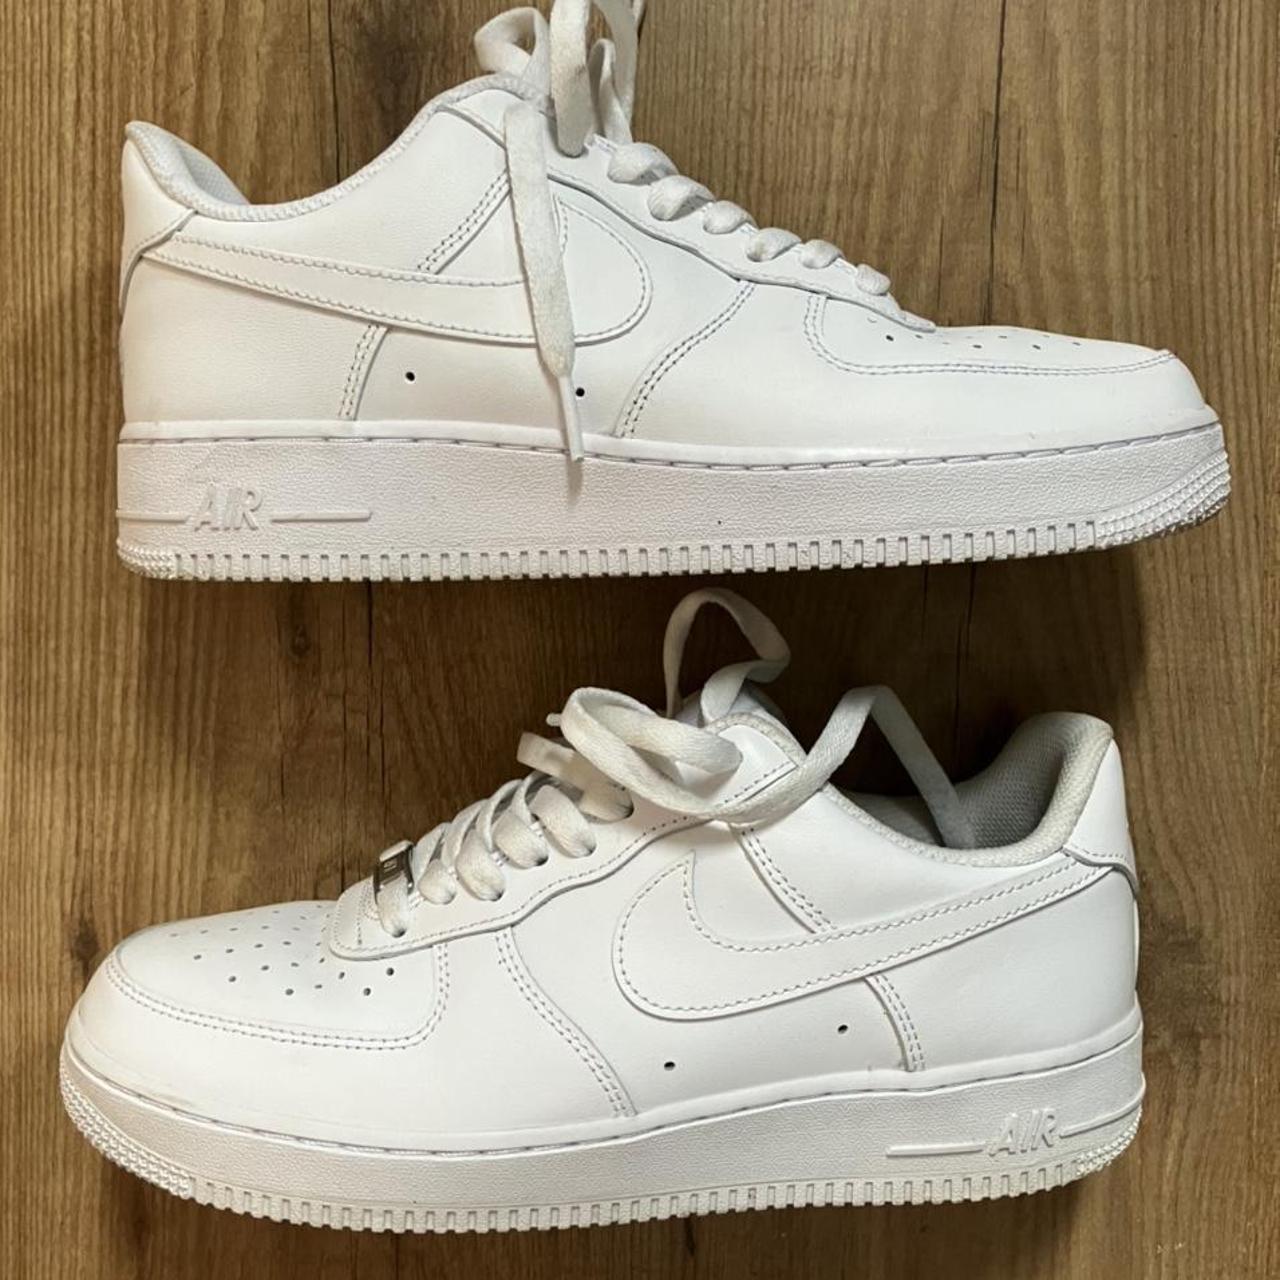 Nike Air Force 1 Men’s Low Profile Trainers Size 8... - Depop